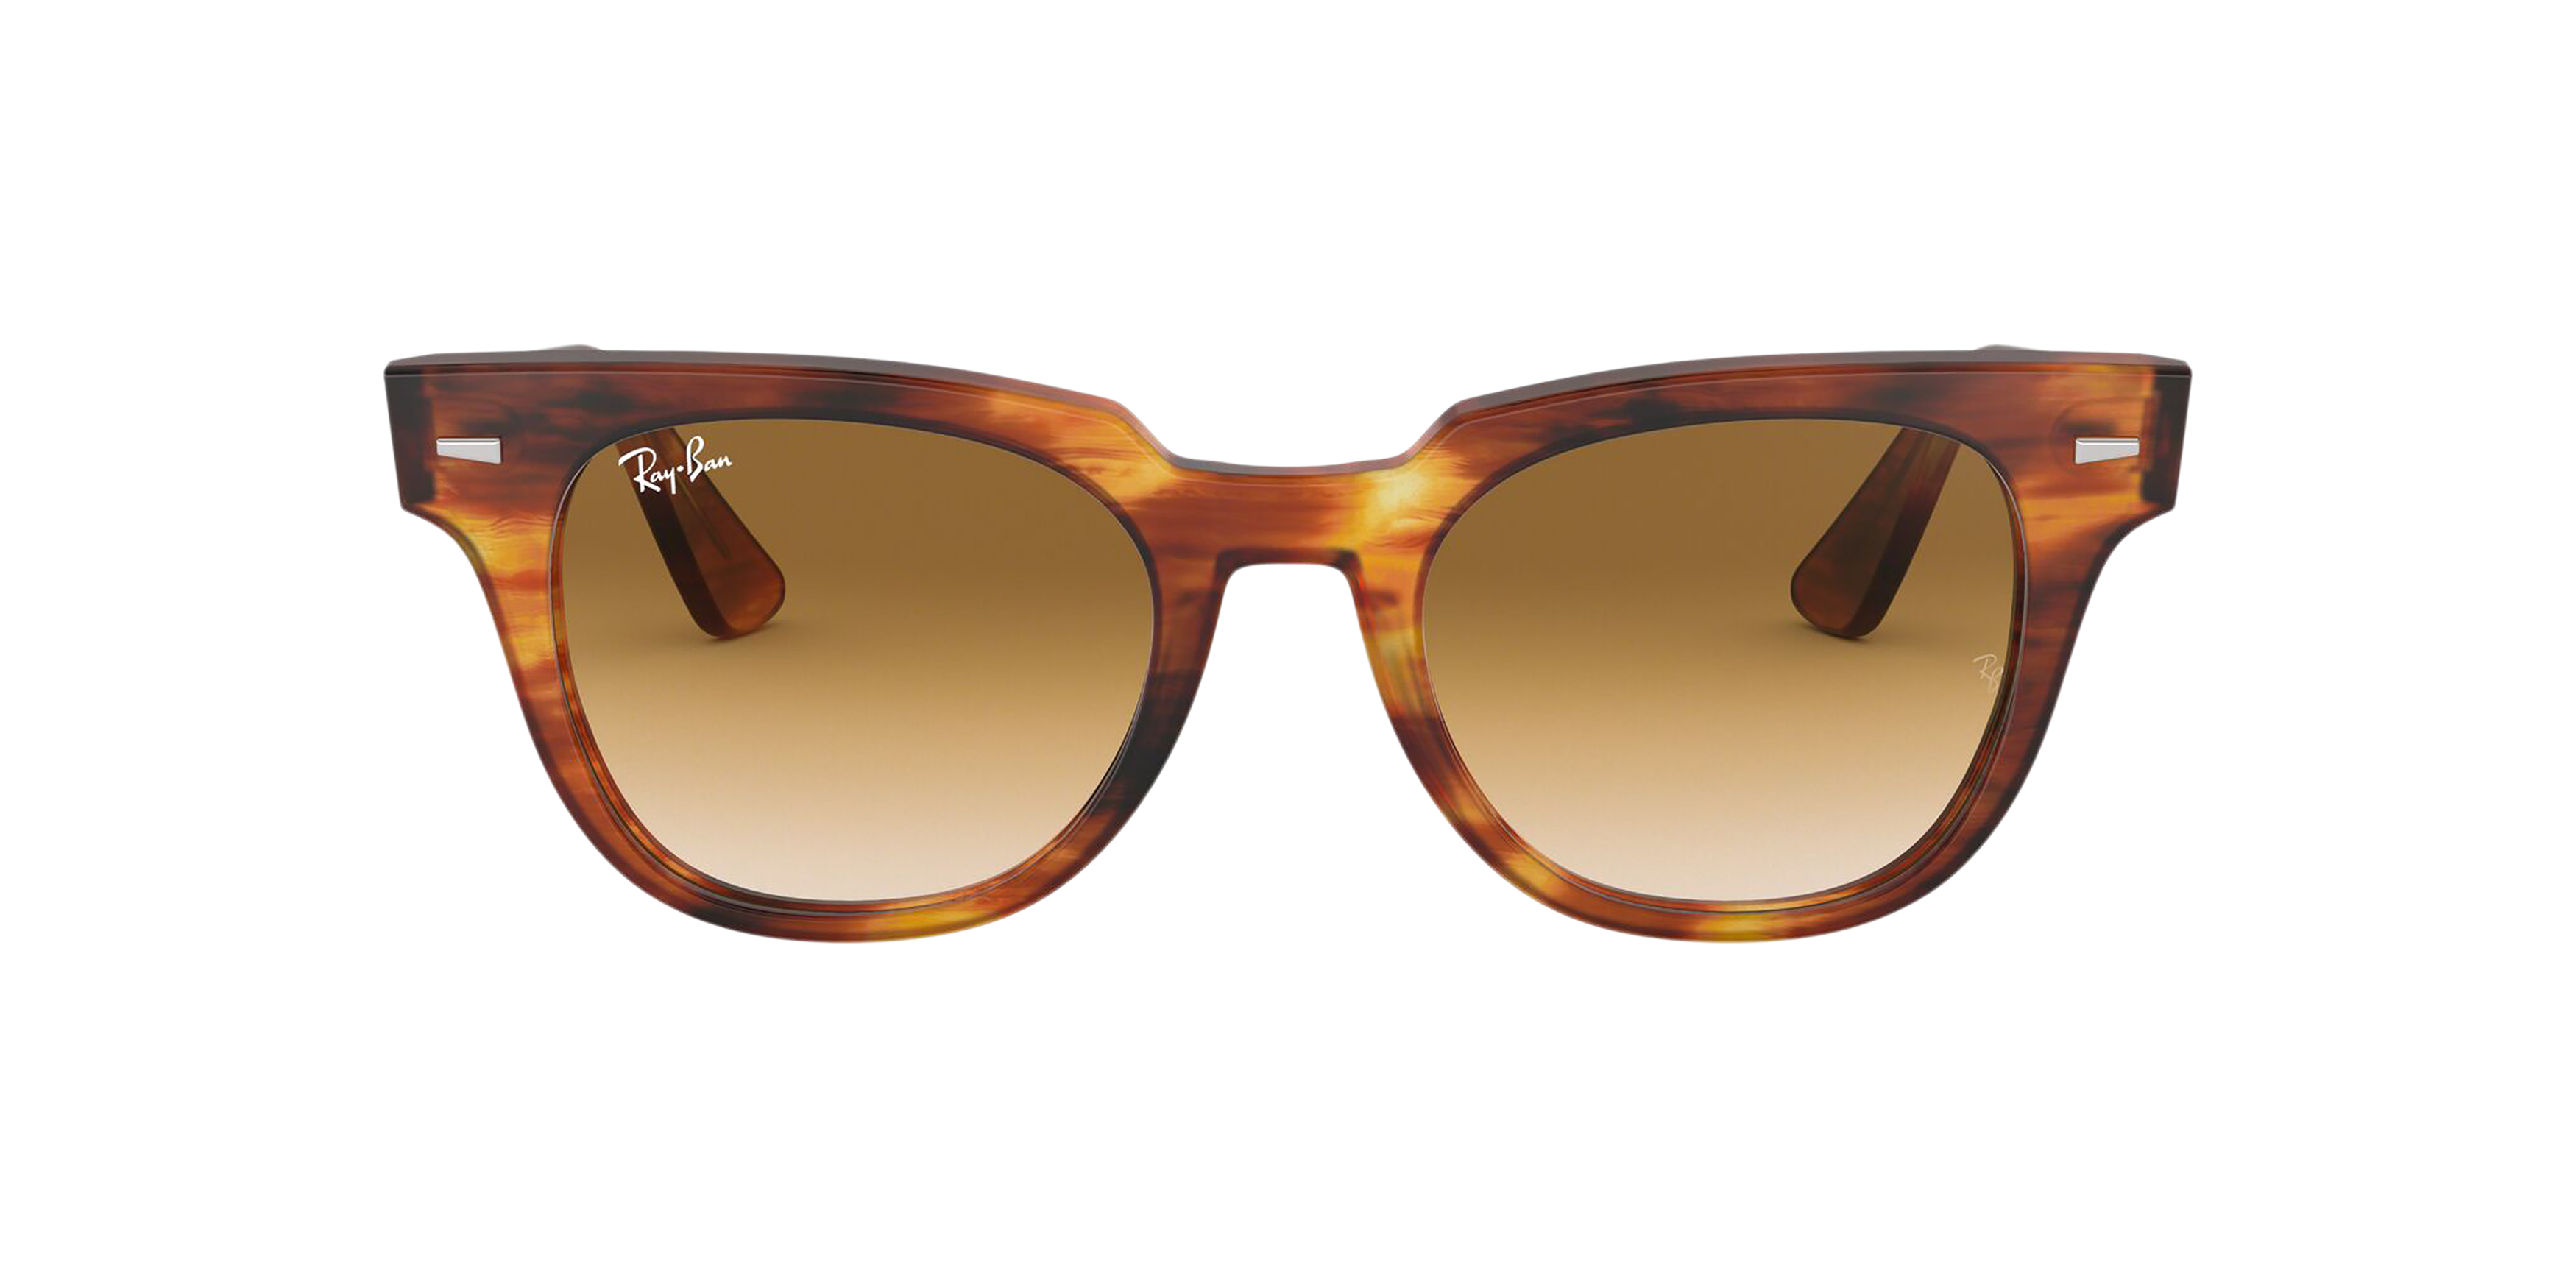 [products.image.front] Ray-Ban Meteor Classic RB2168 954/51